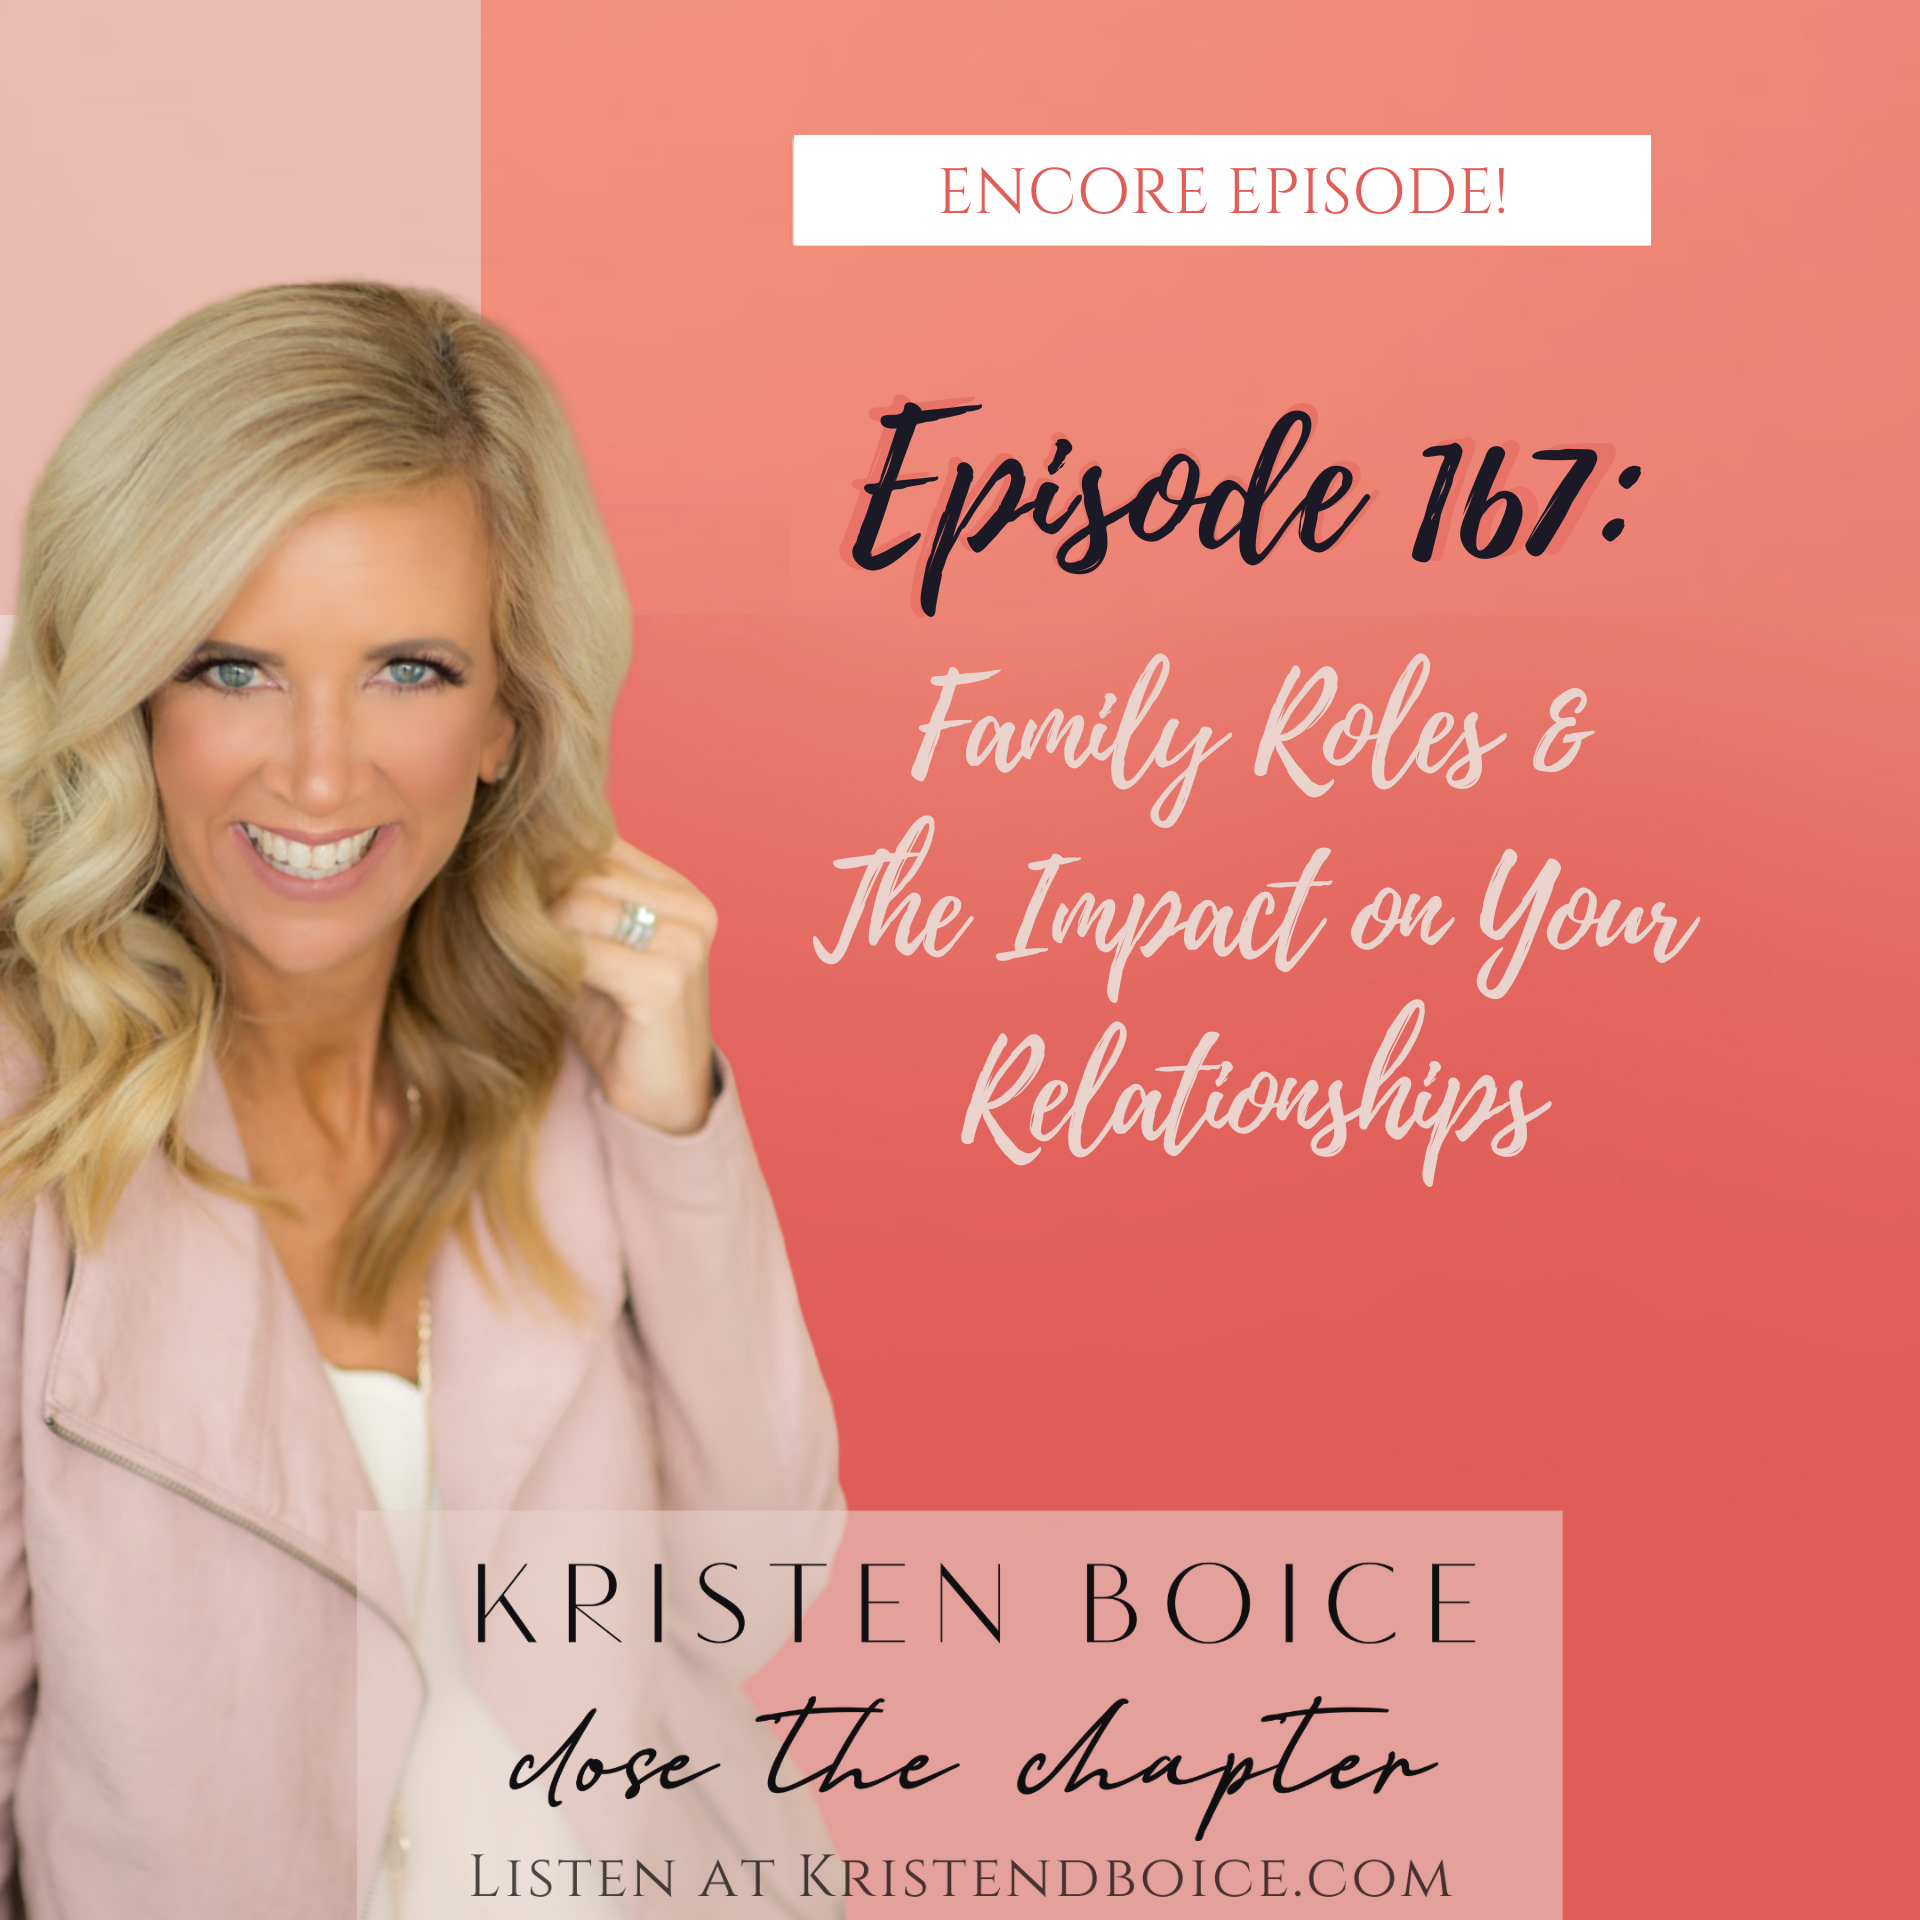 Episode 167 Family Roles and The Impact on Your Relationships